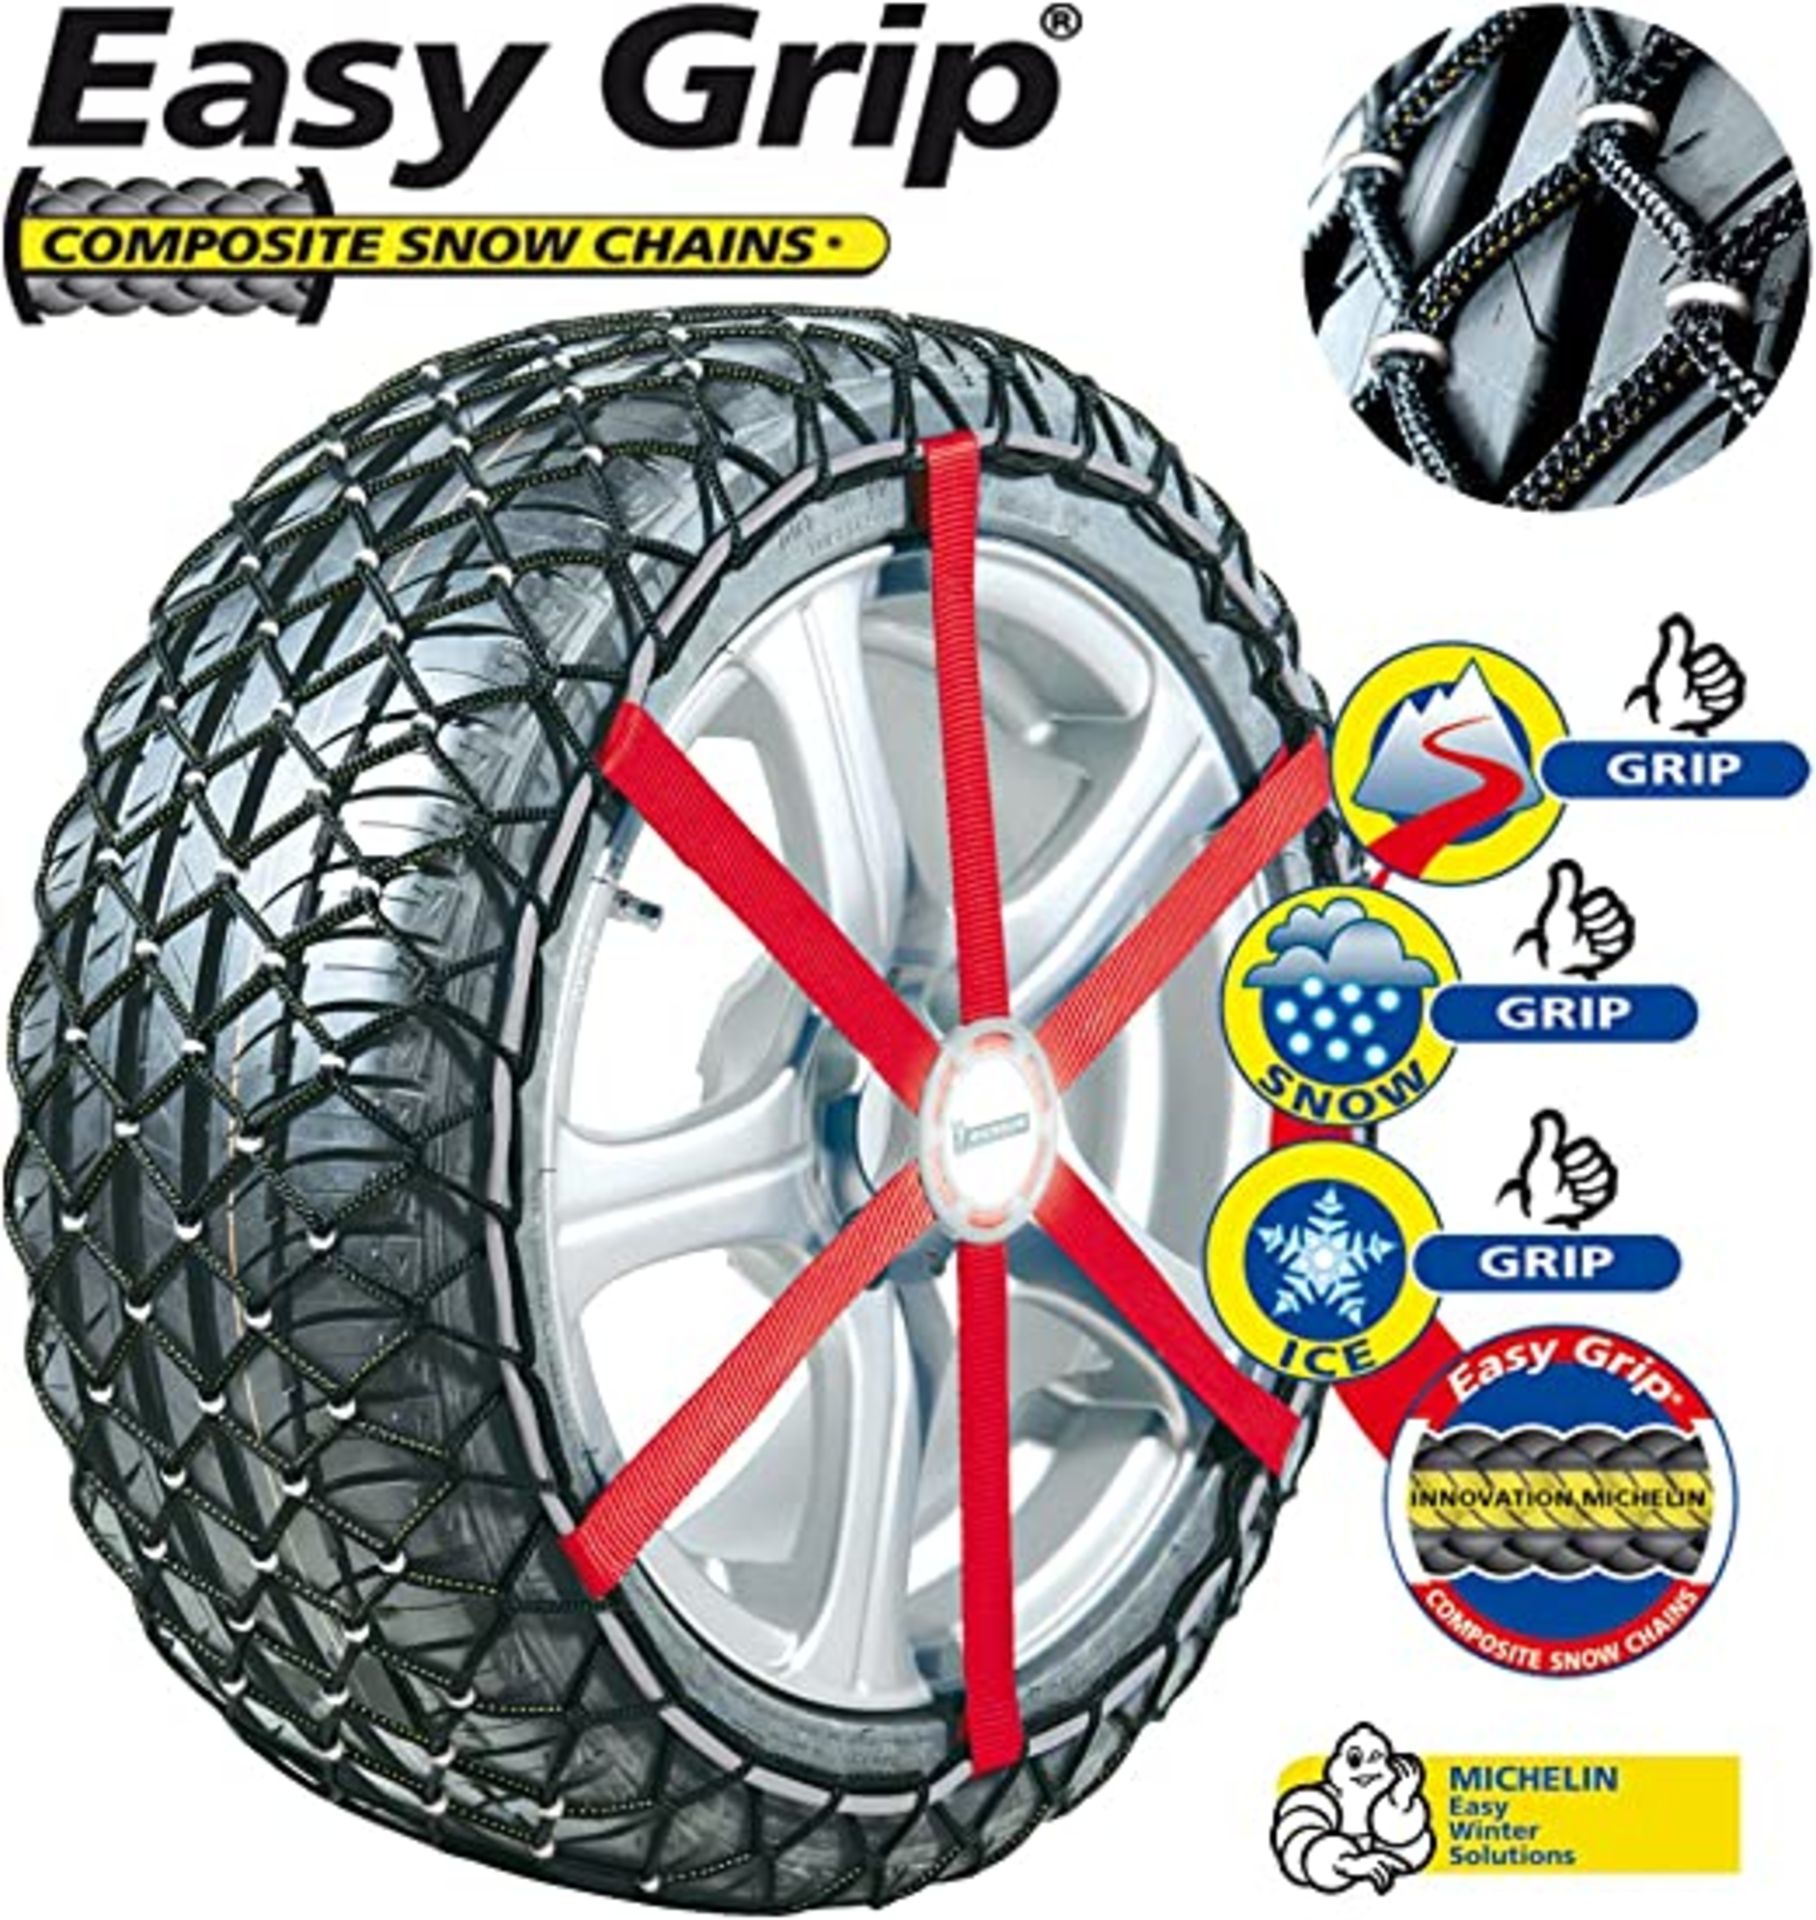 5 X NEW PACKAGED SETS OF Michelin 92302 Textile snow chains Easy Grip J11, ABS and ESP compatible, - Image 2 of 3